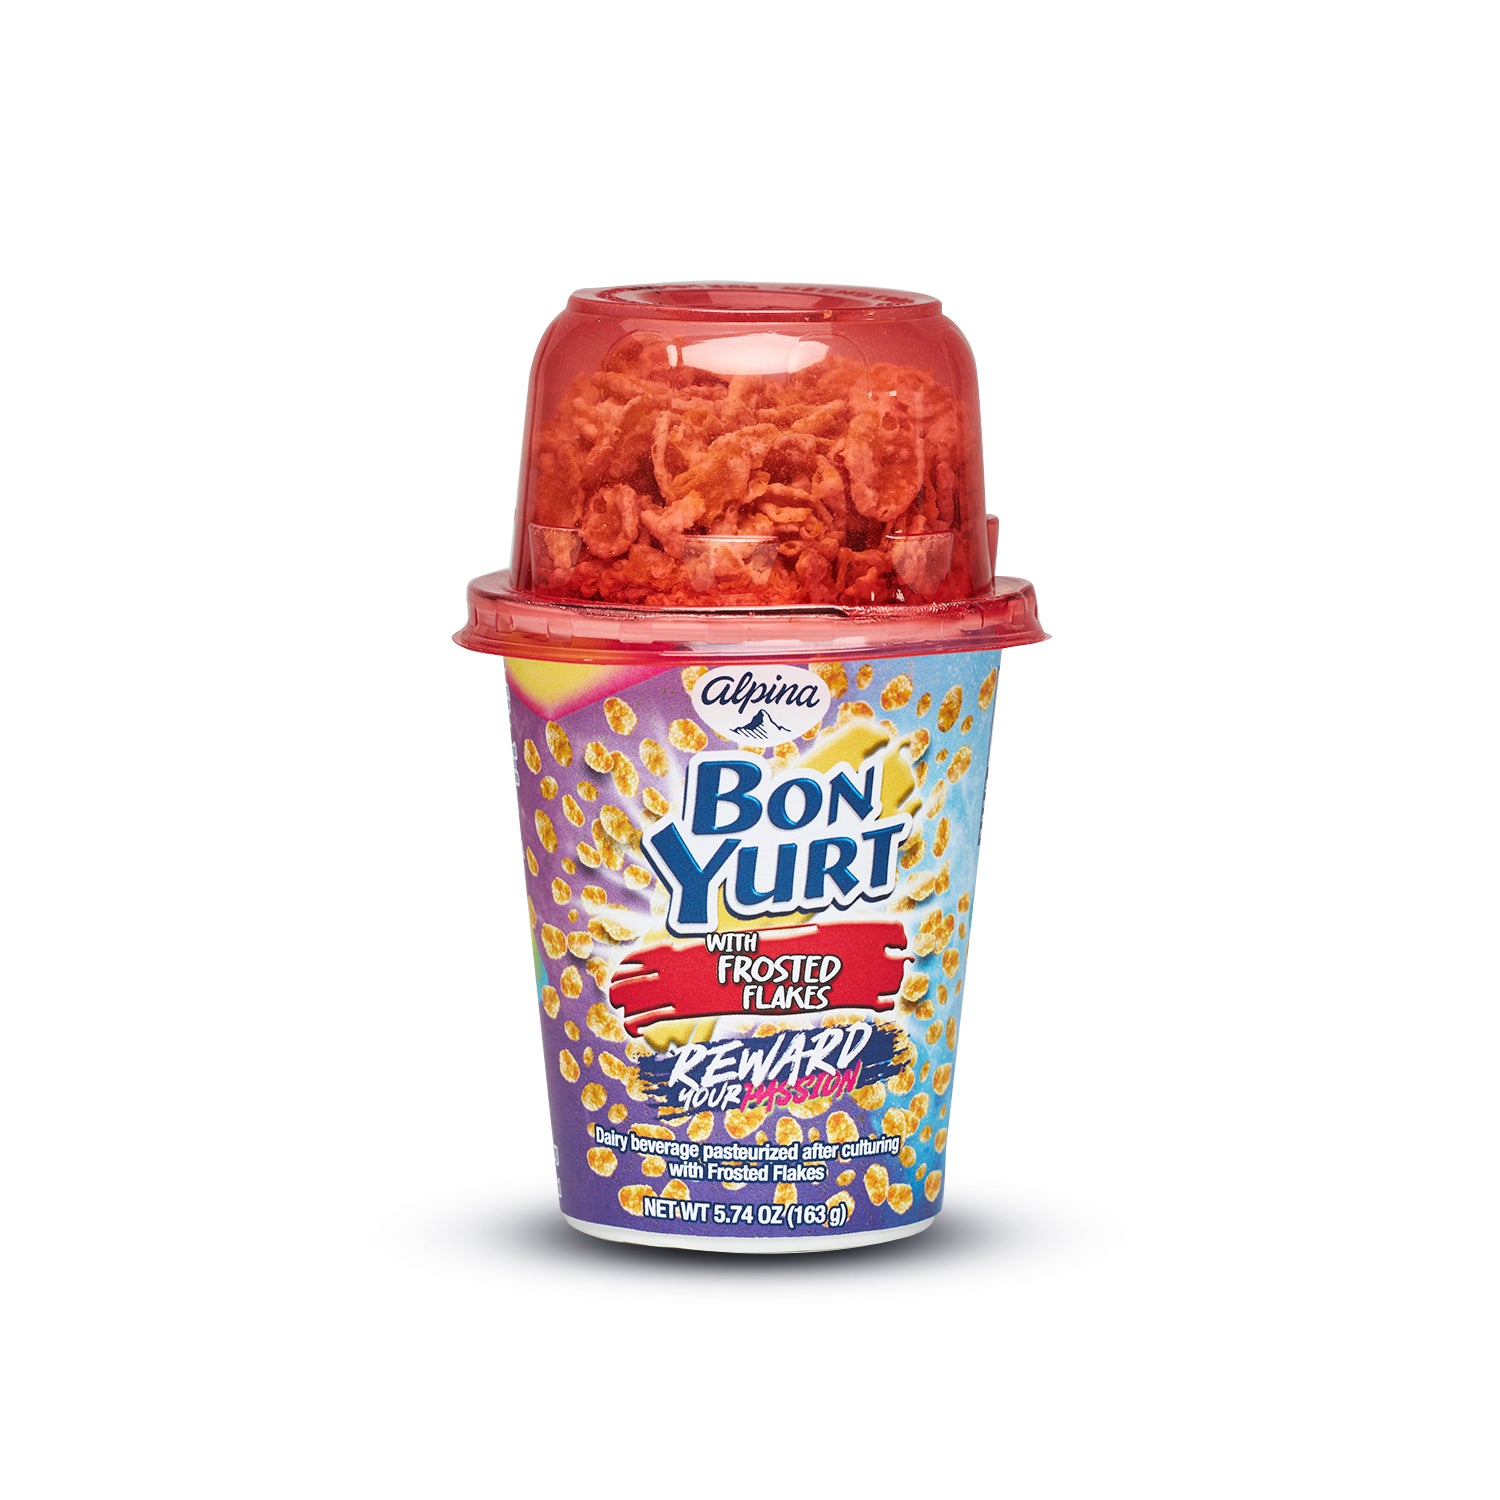 Bon Yurt with Frosted Flakes